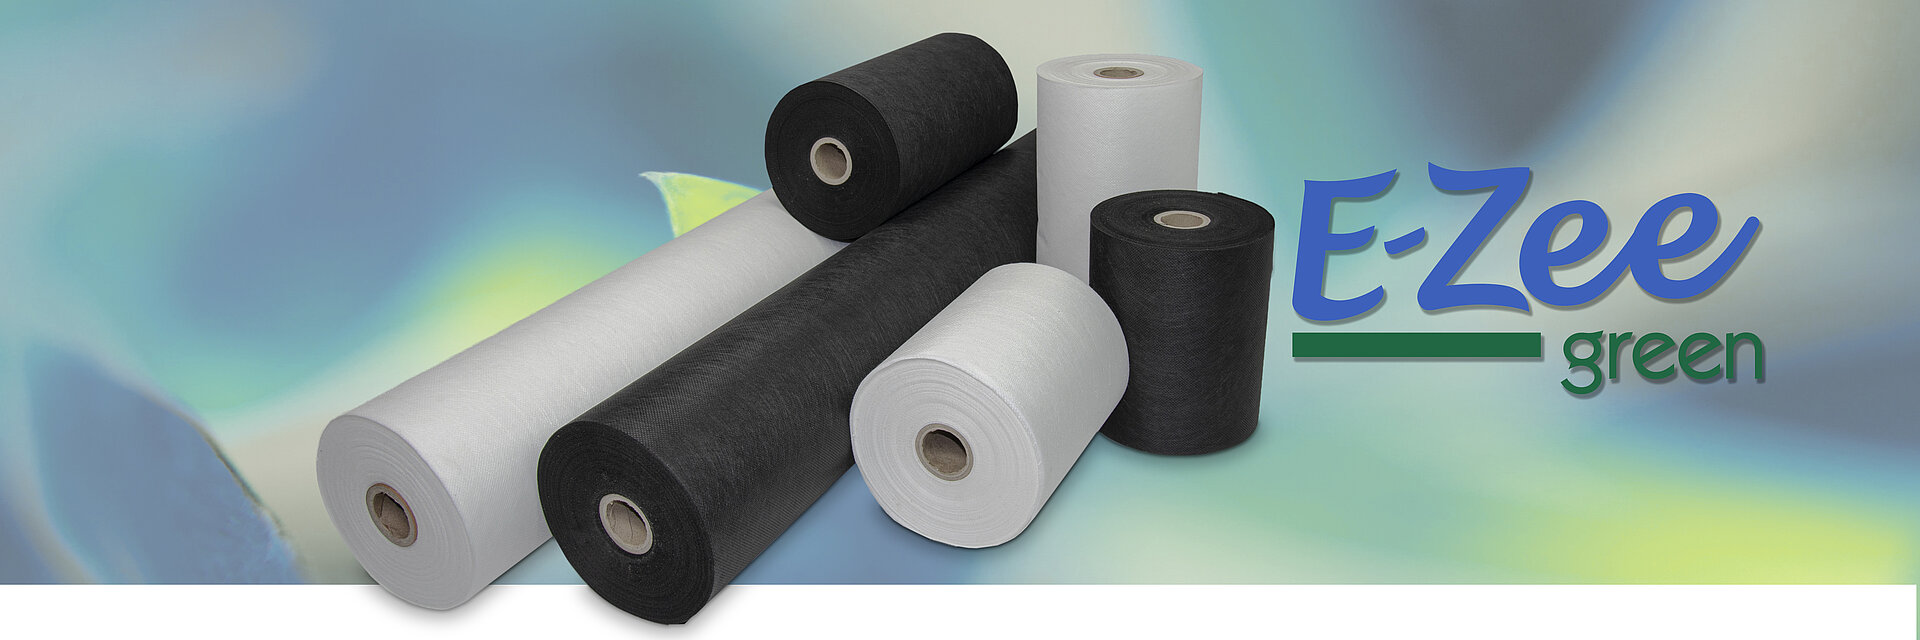 Polyester Embroidery Backing Nonwoven Embroidery Backing Paper Non